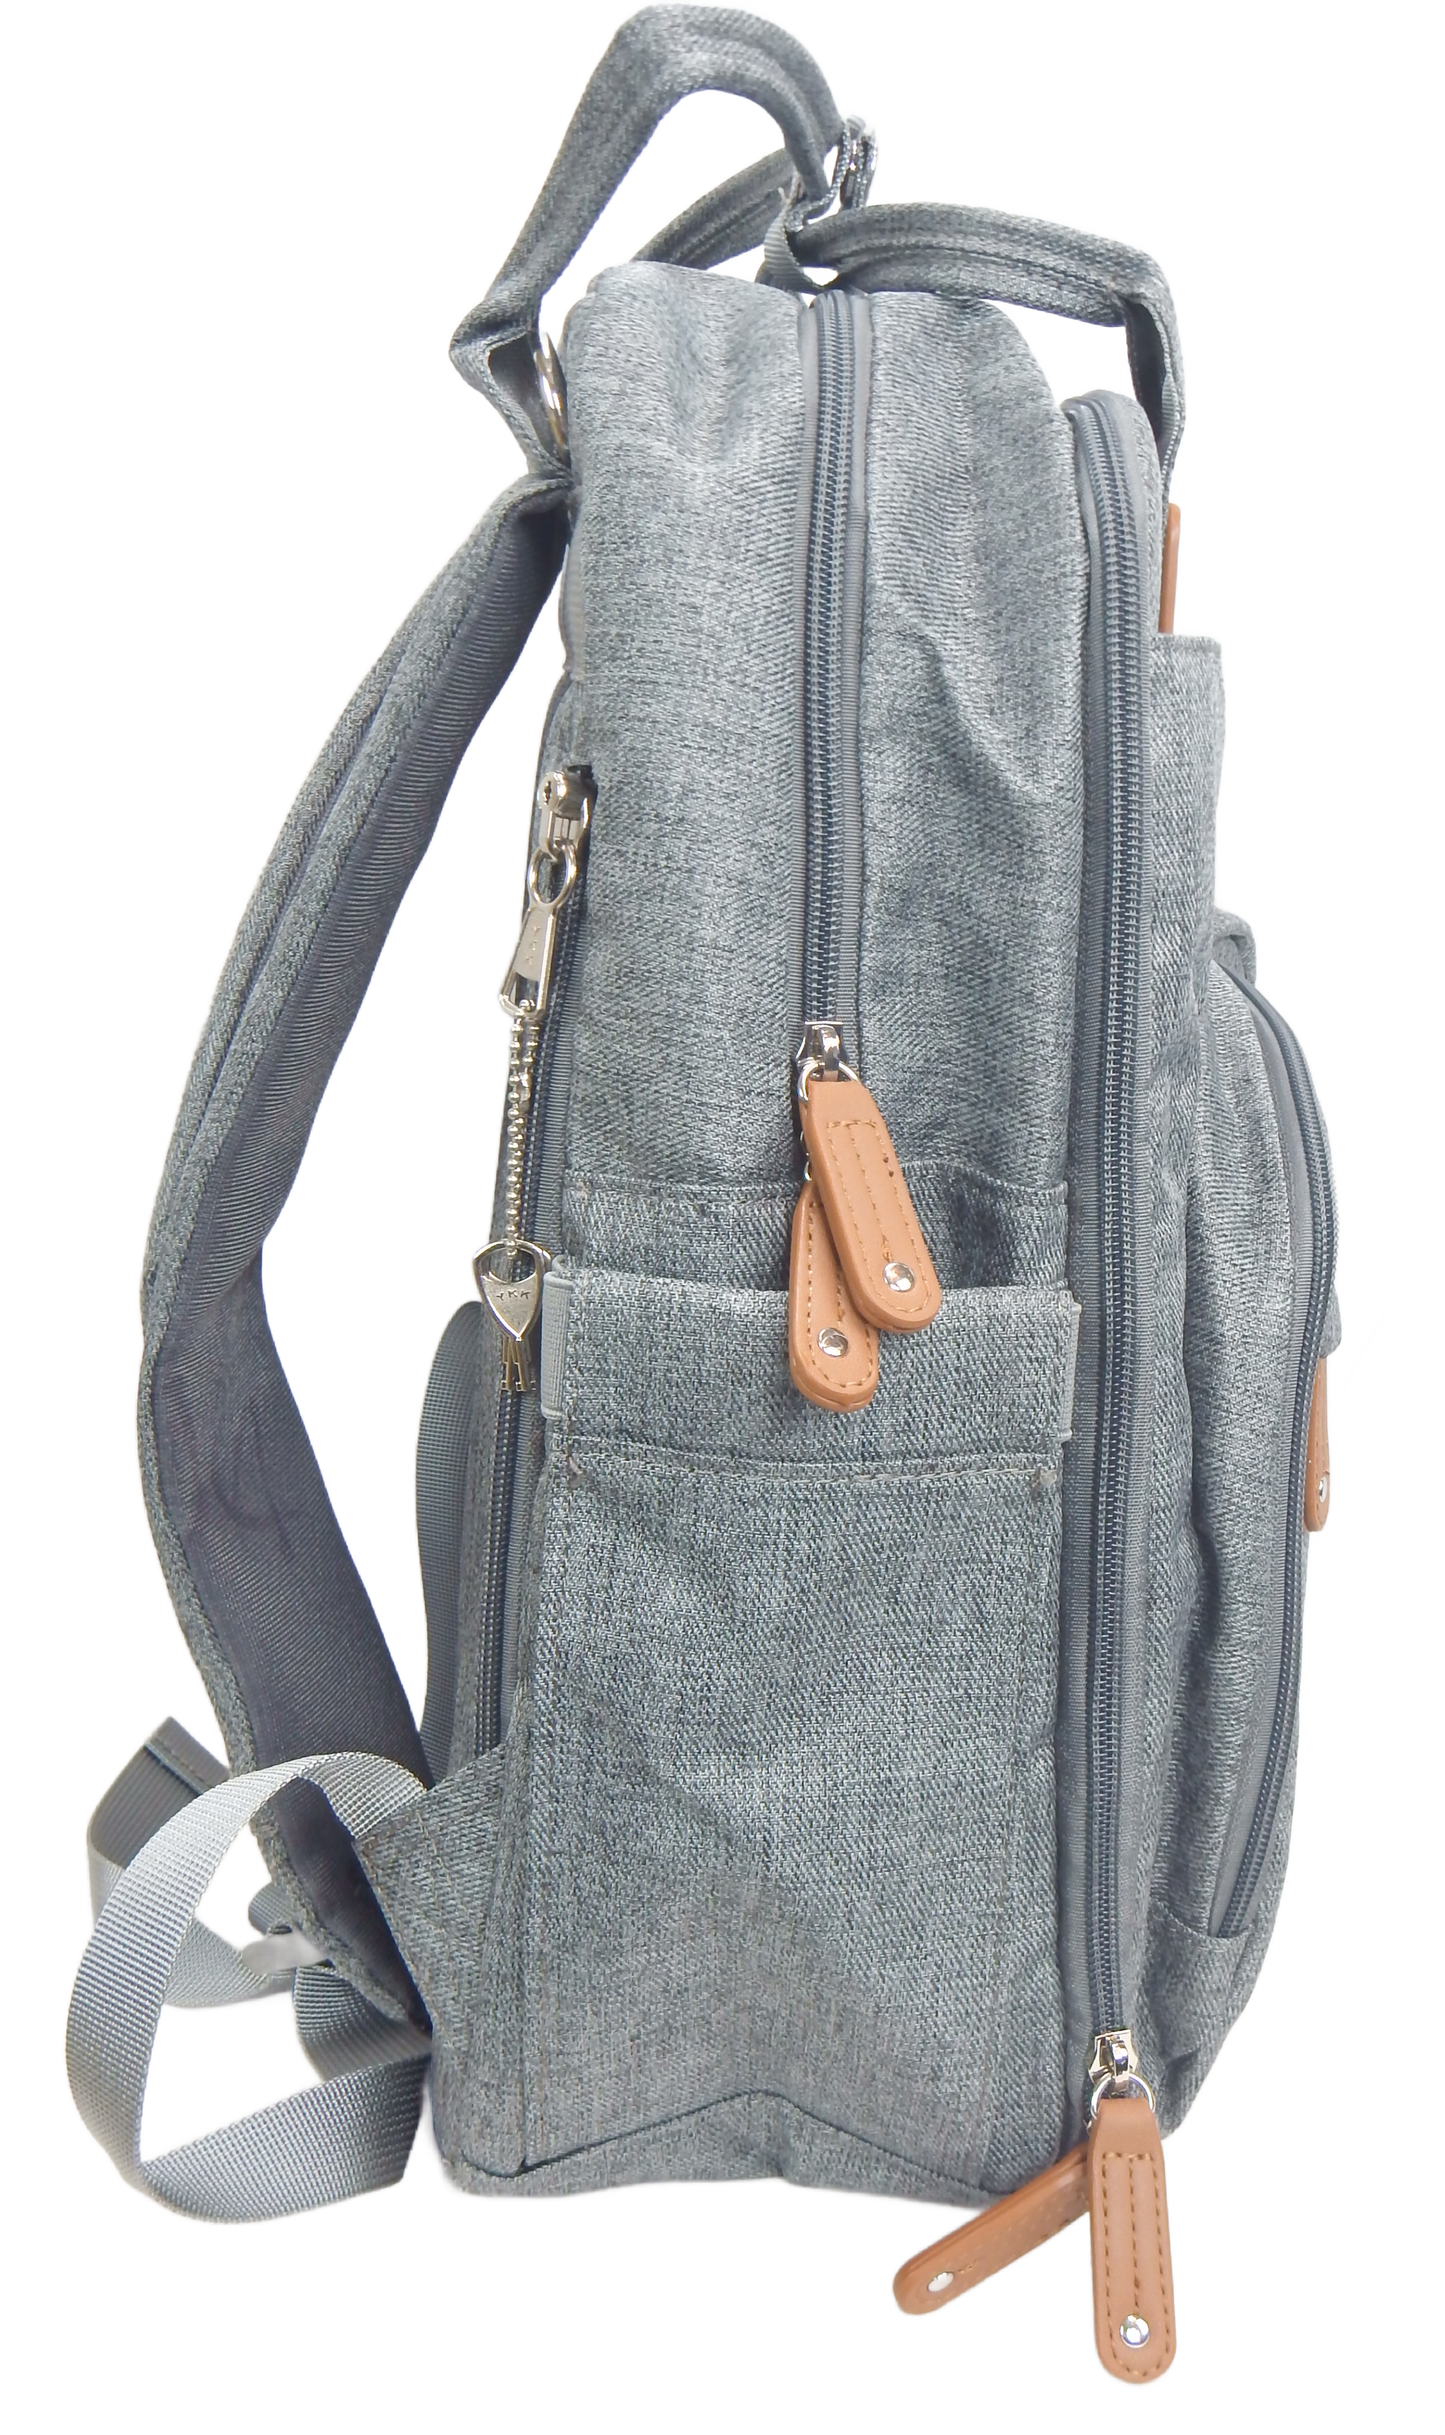 Concealed Carry Diaper Bag